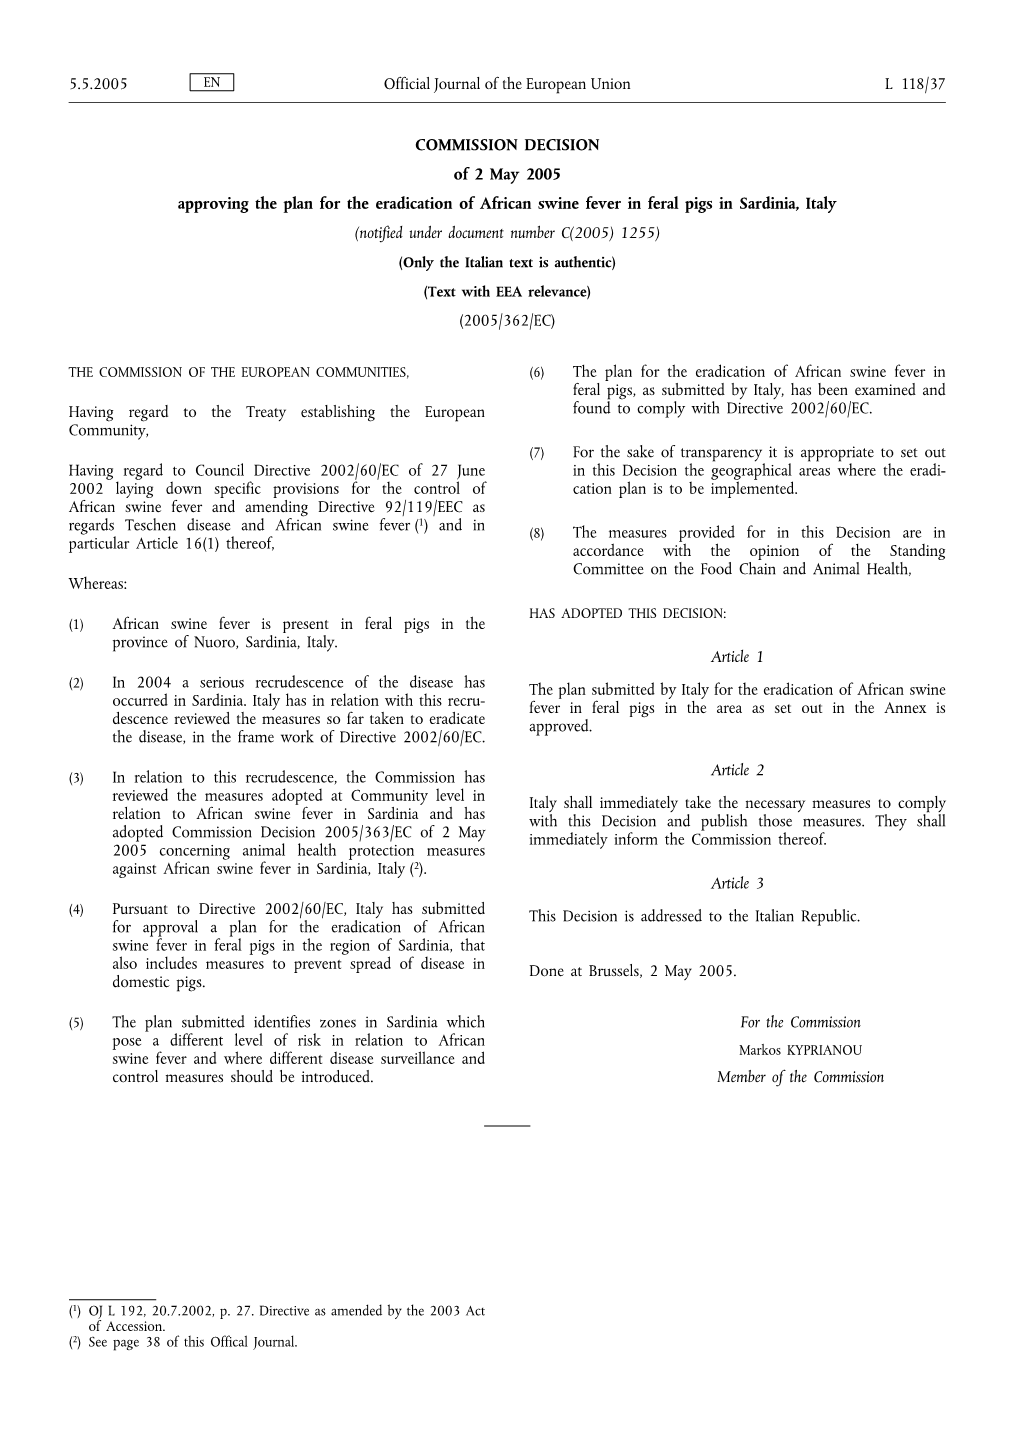 COMMISSION DECISION of 2 May 2005 Approving the Plan for The